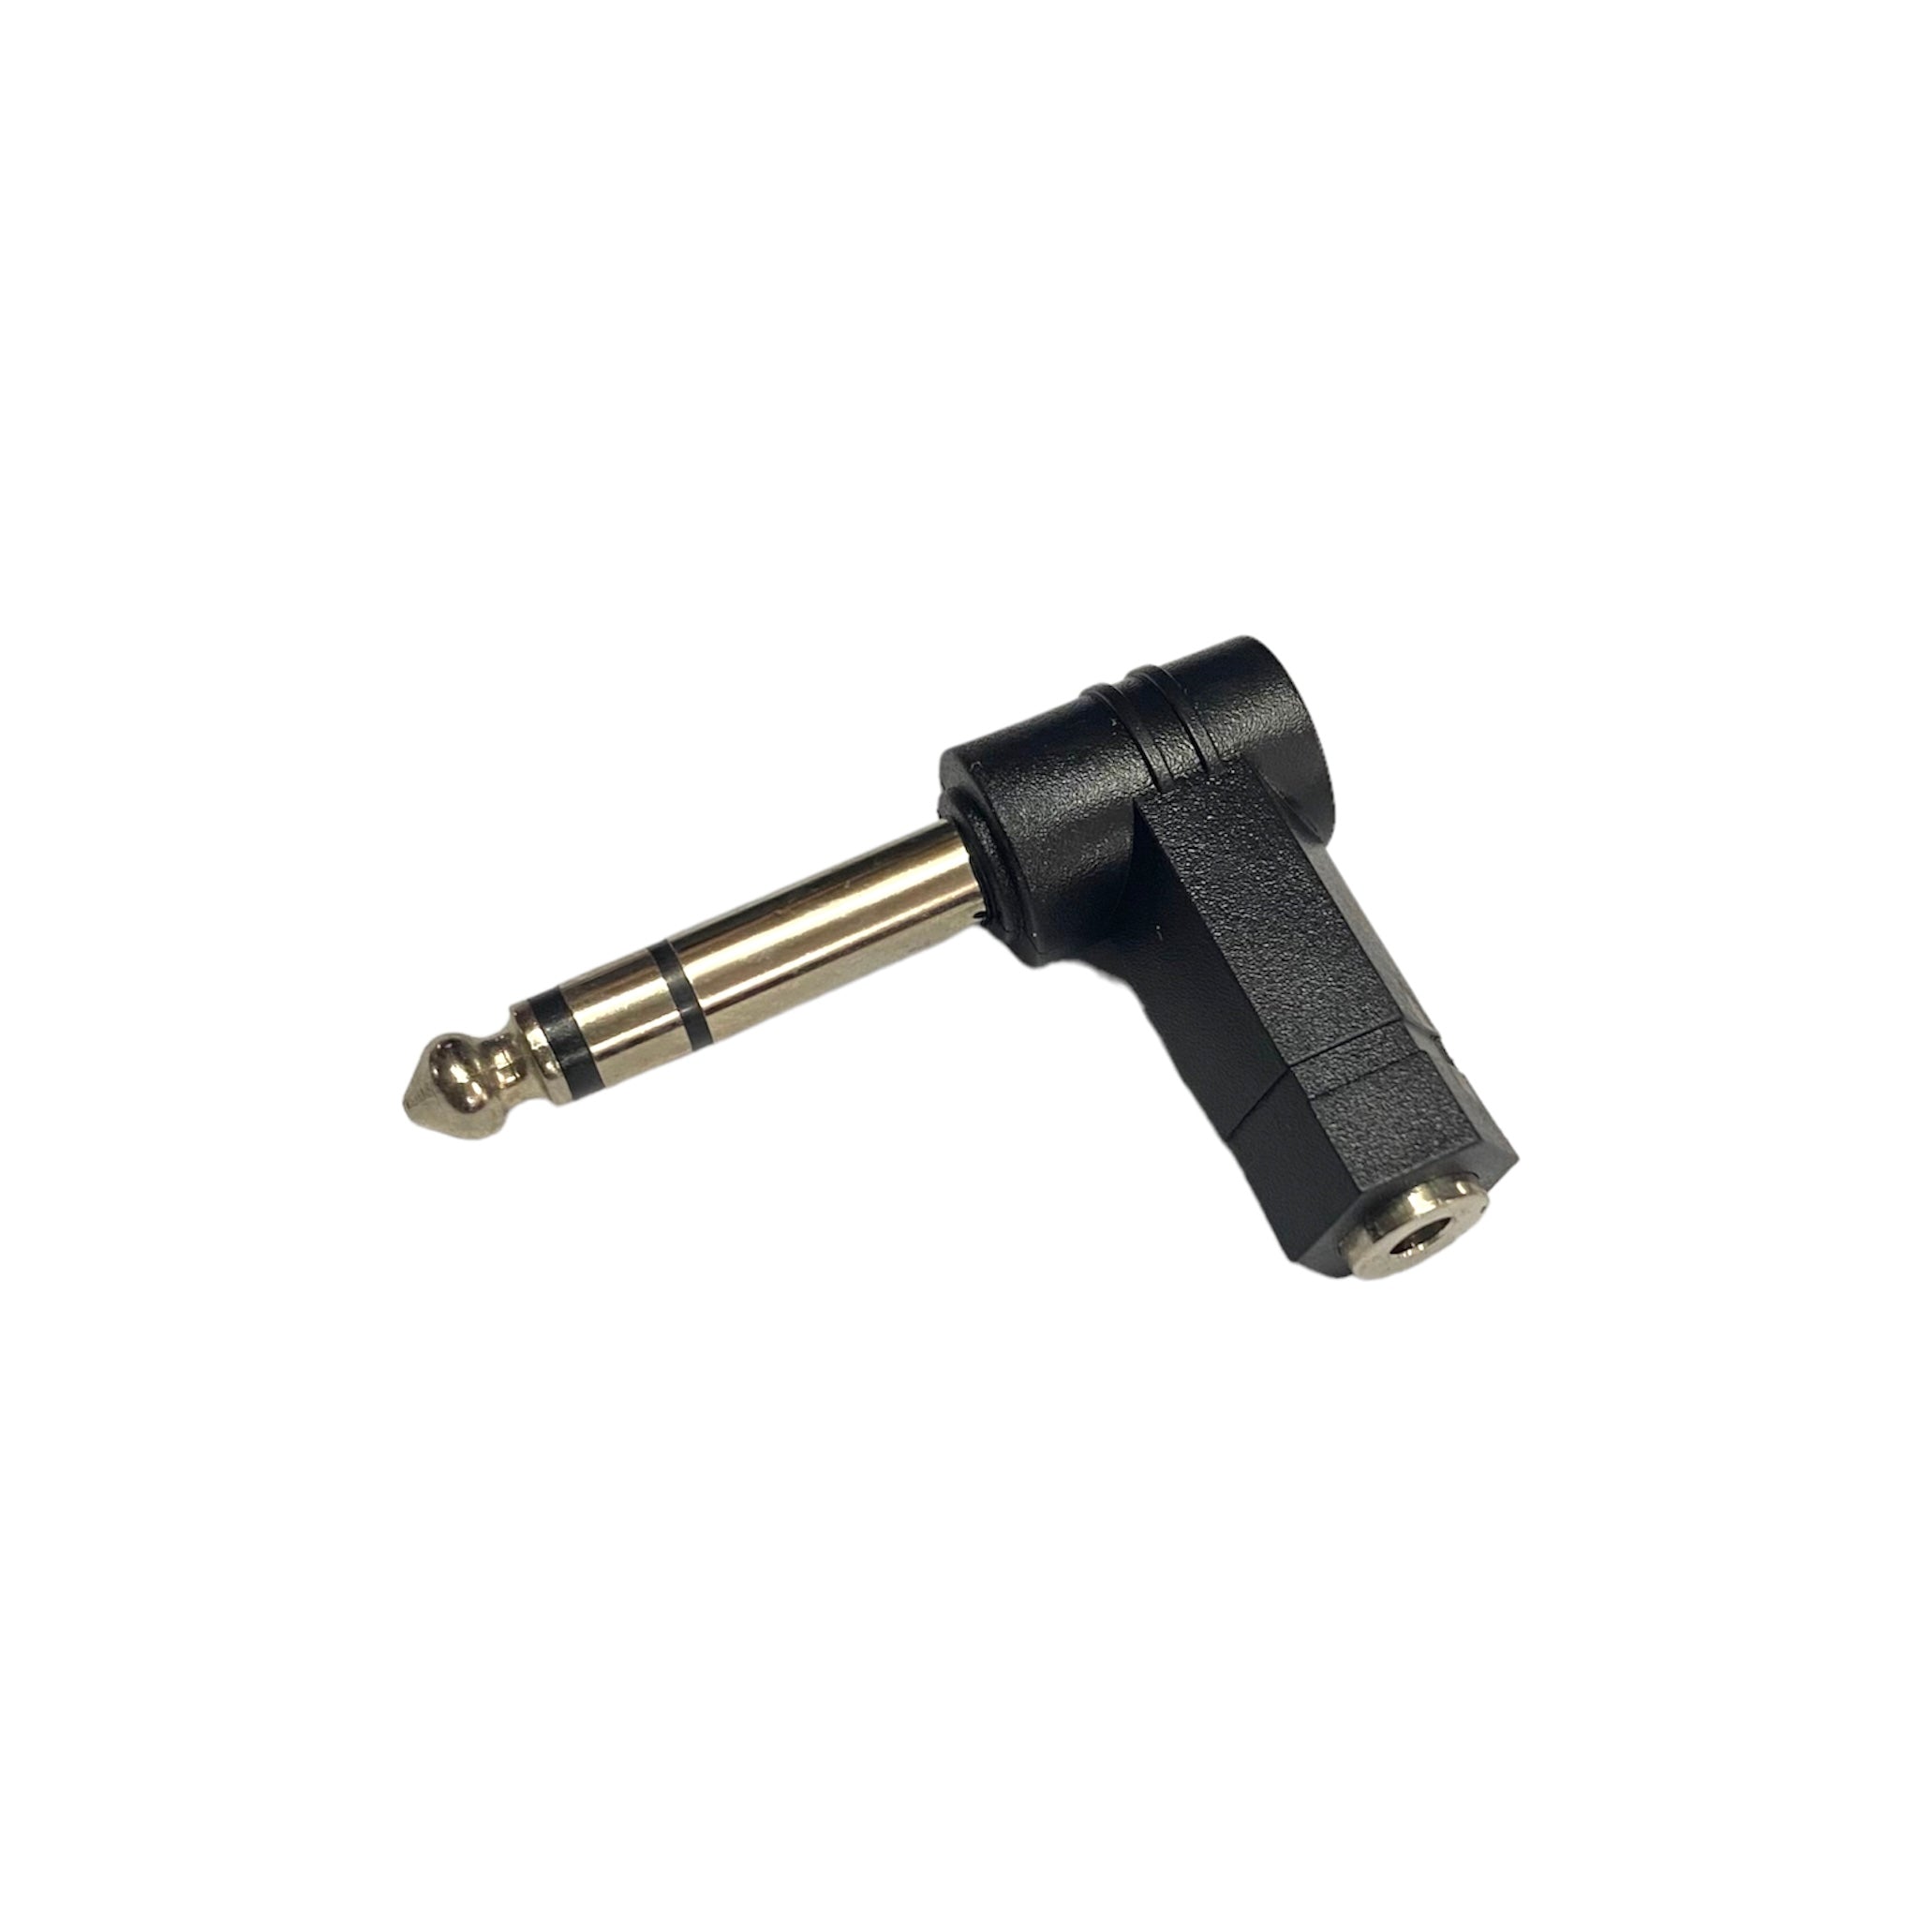 Adaptor - Stereo 3.5mm Female to 6.3mm Male - Right Angle